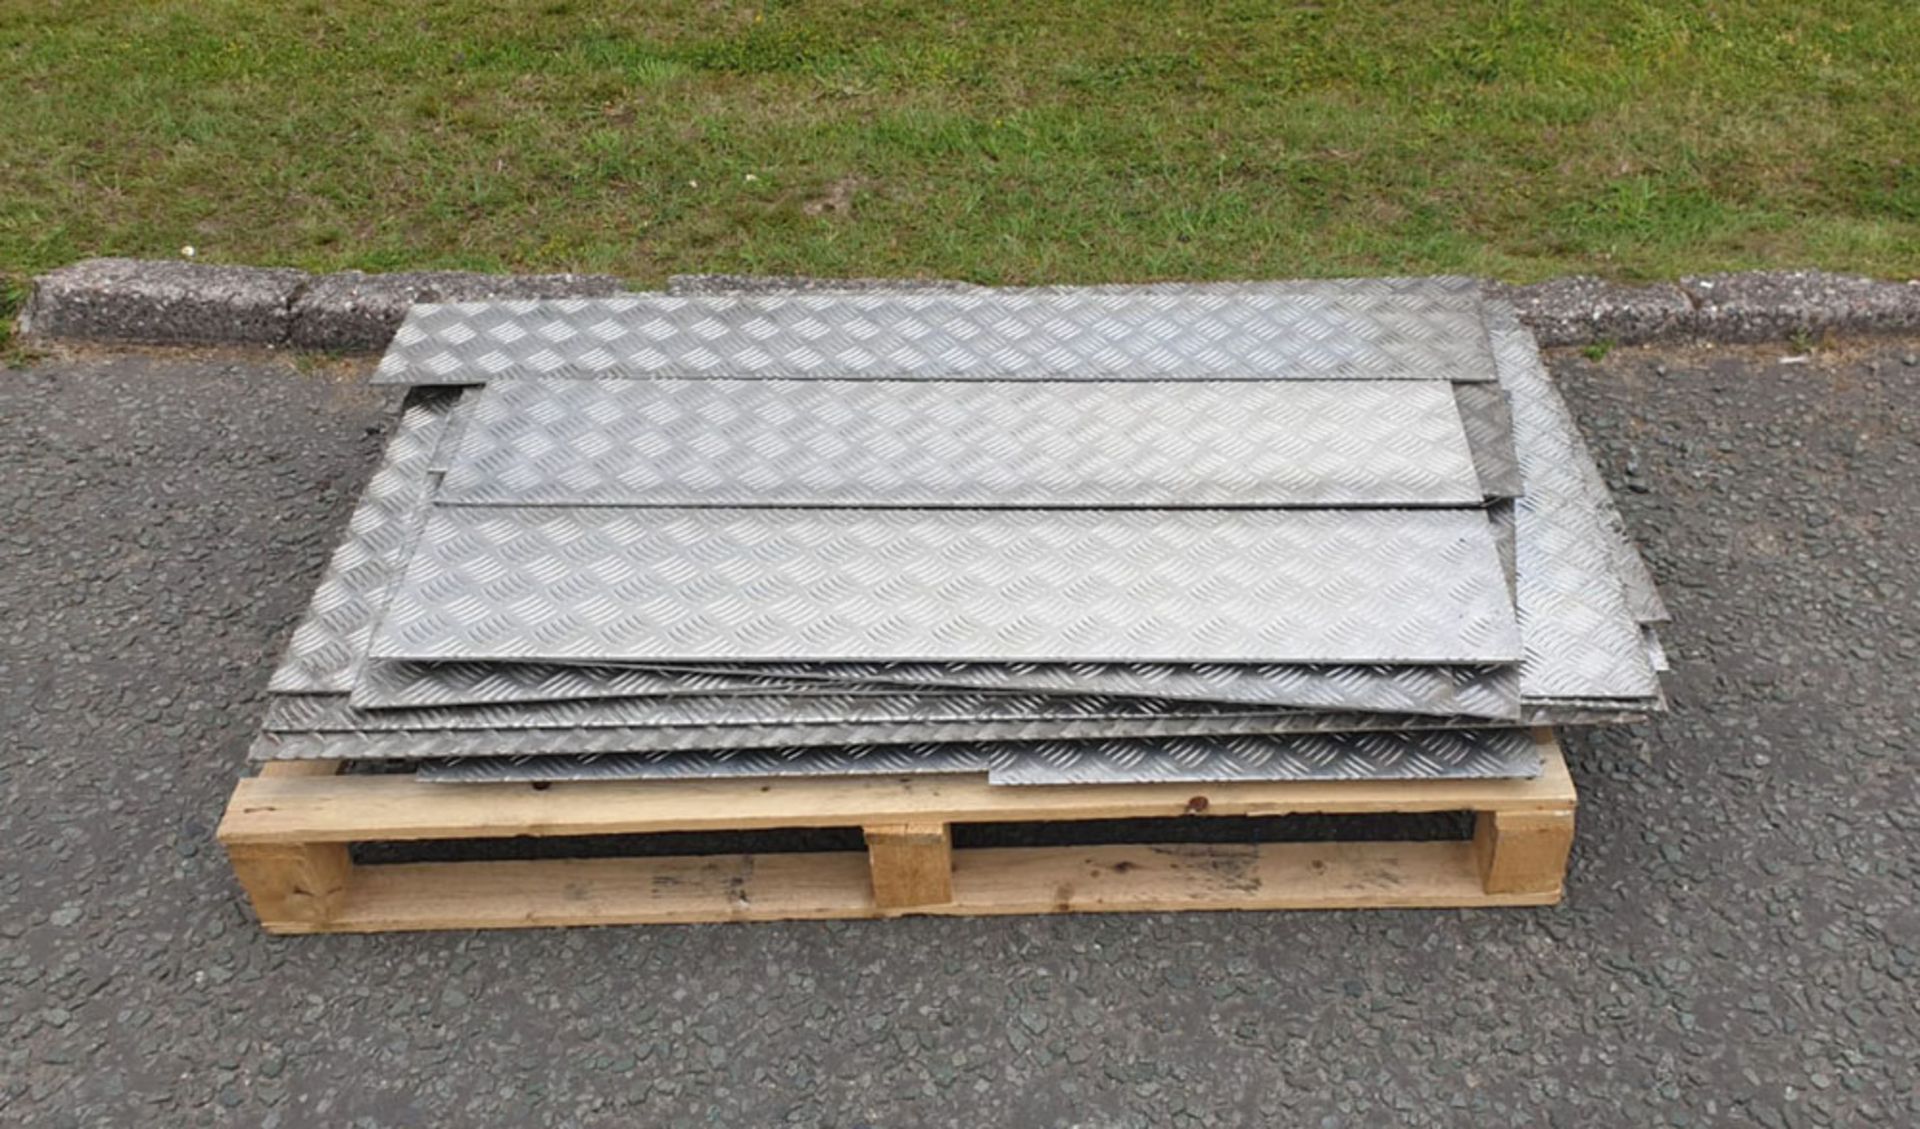 Lot of Several Aluminium Chequer Plate Off Cuts. Various Sizes and Thicknesses.